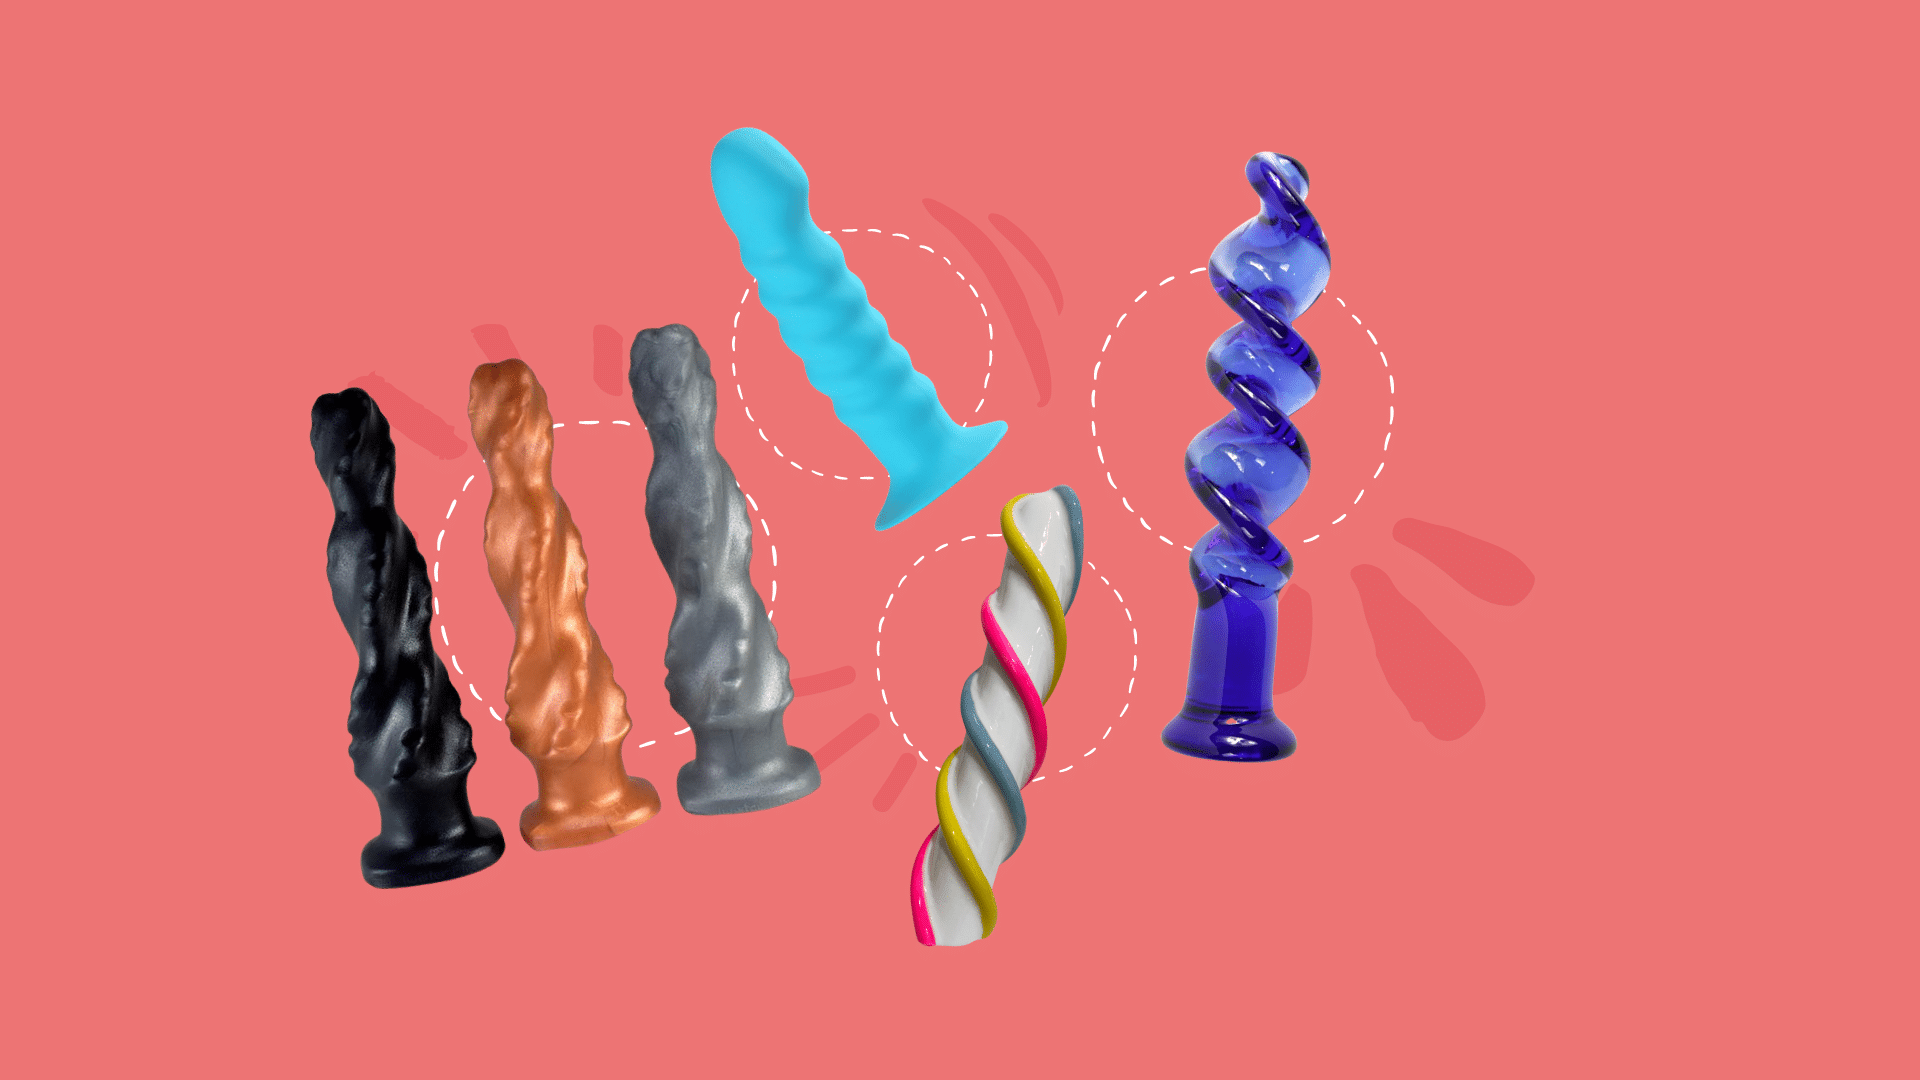 The 9 Best Corkscrew Dildos for Twisted Temptations